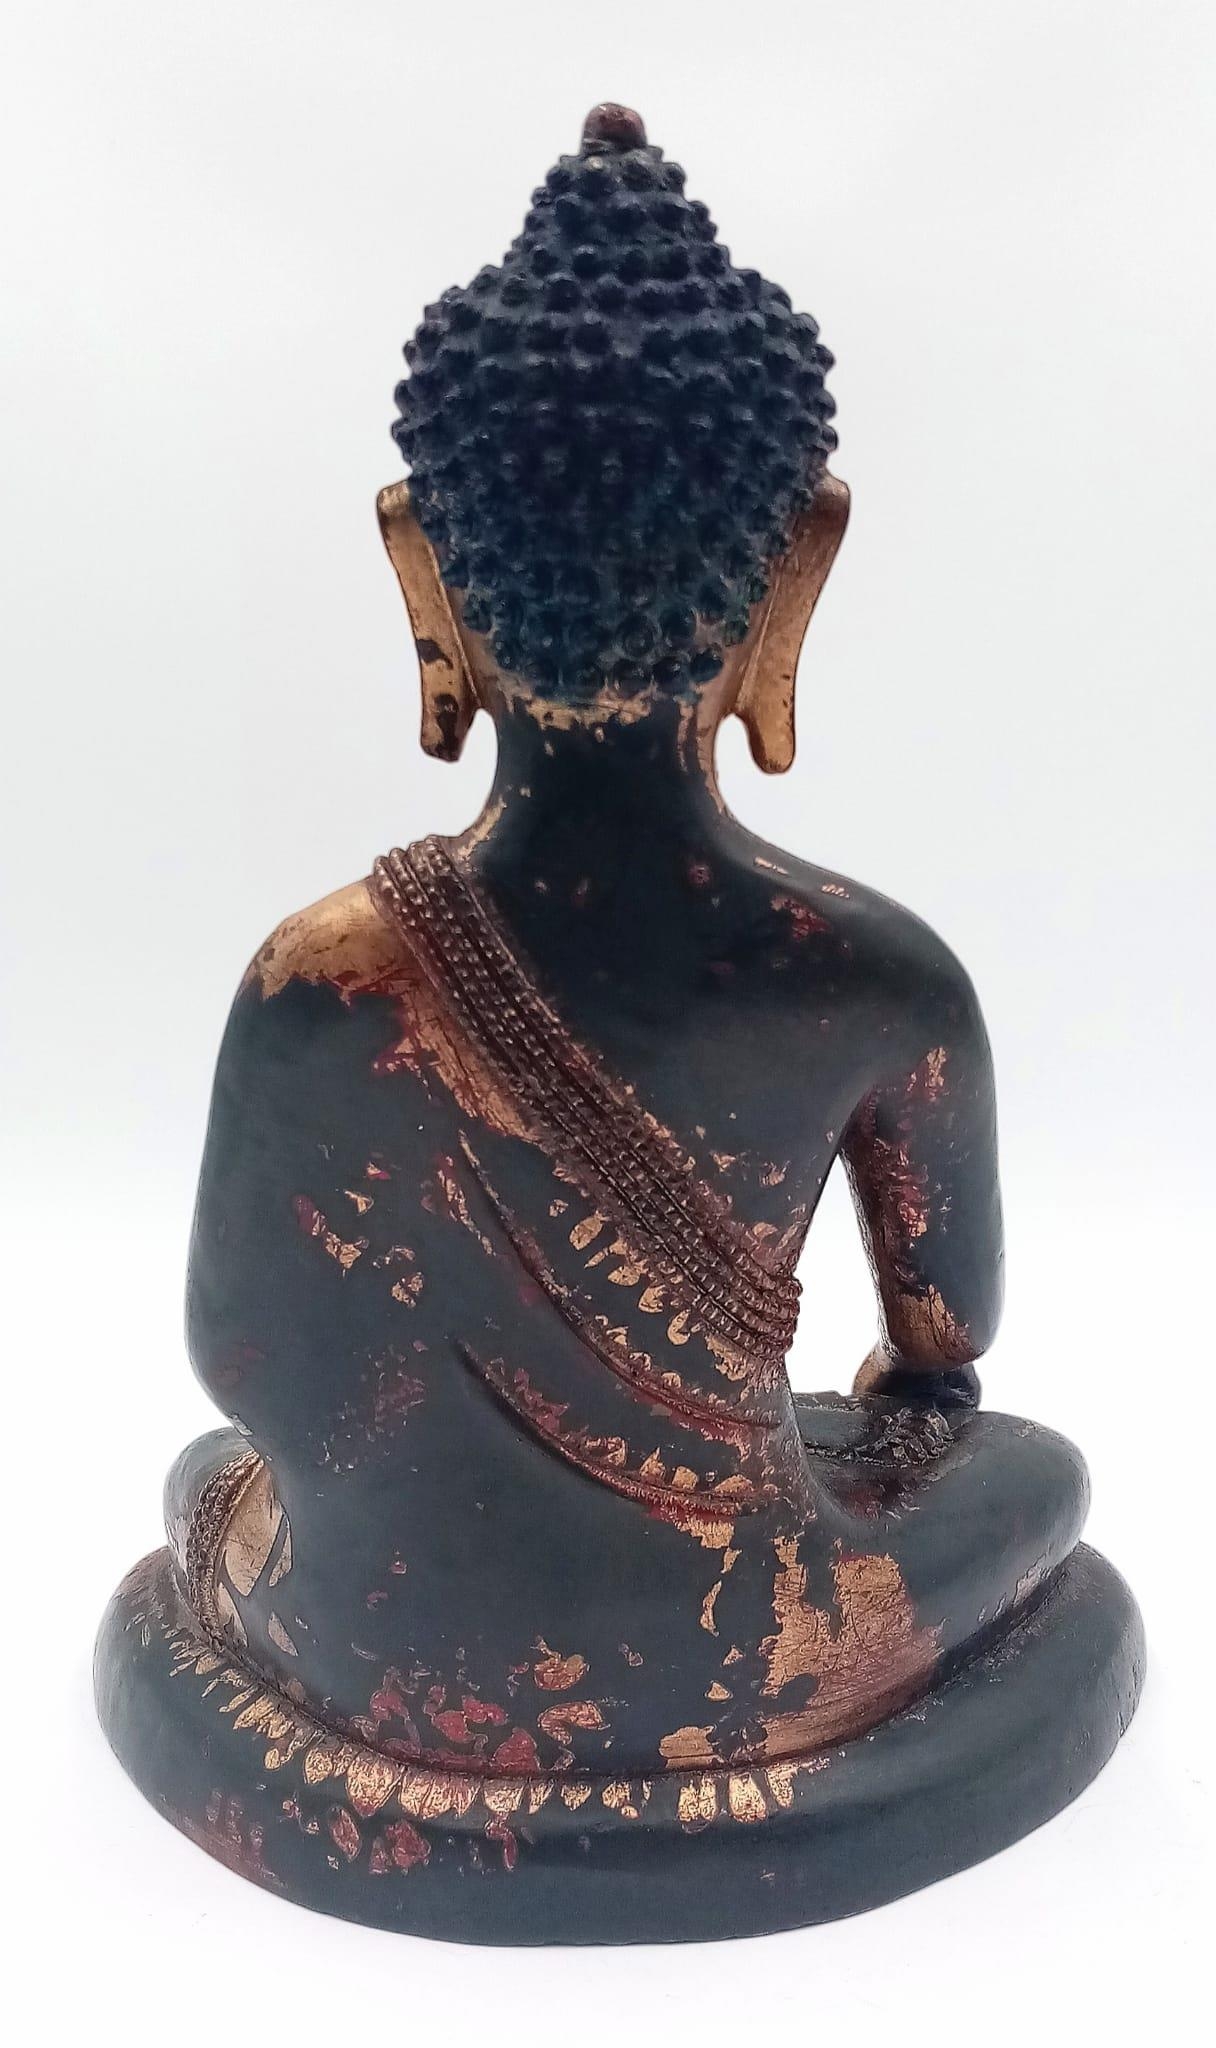 A Majestic Antique Chinese Seated Buddha Figure - Decorated with gilt and polychrome highlights. - Image 2 of 4